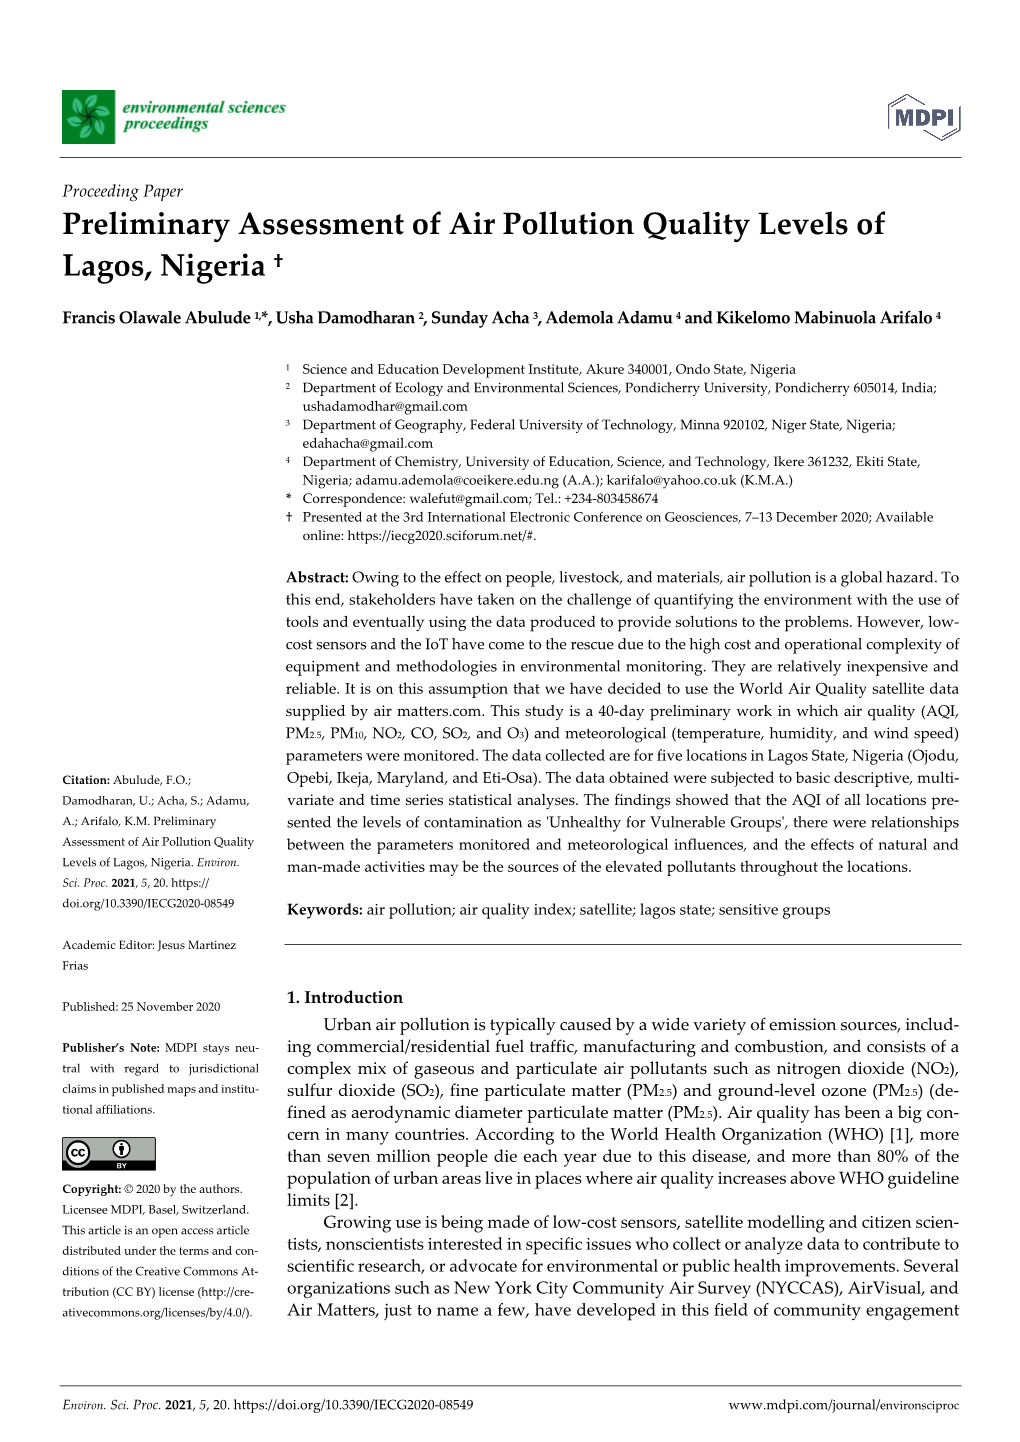 Preliminary Assessment of Air Pollution Quality Levels of Lagos, Nigeria †